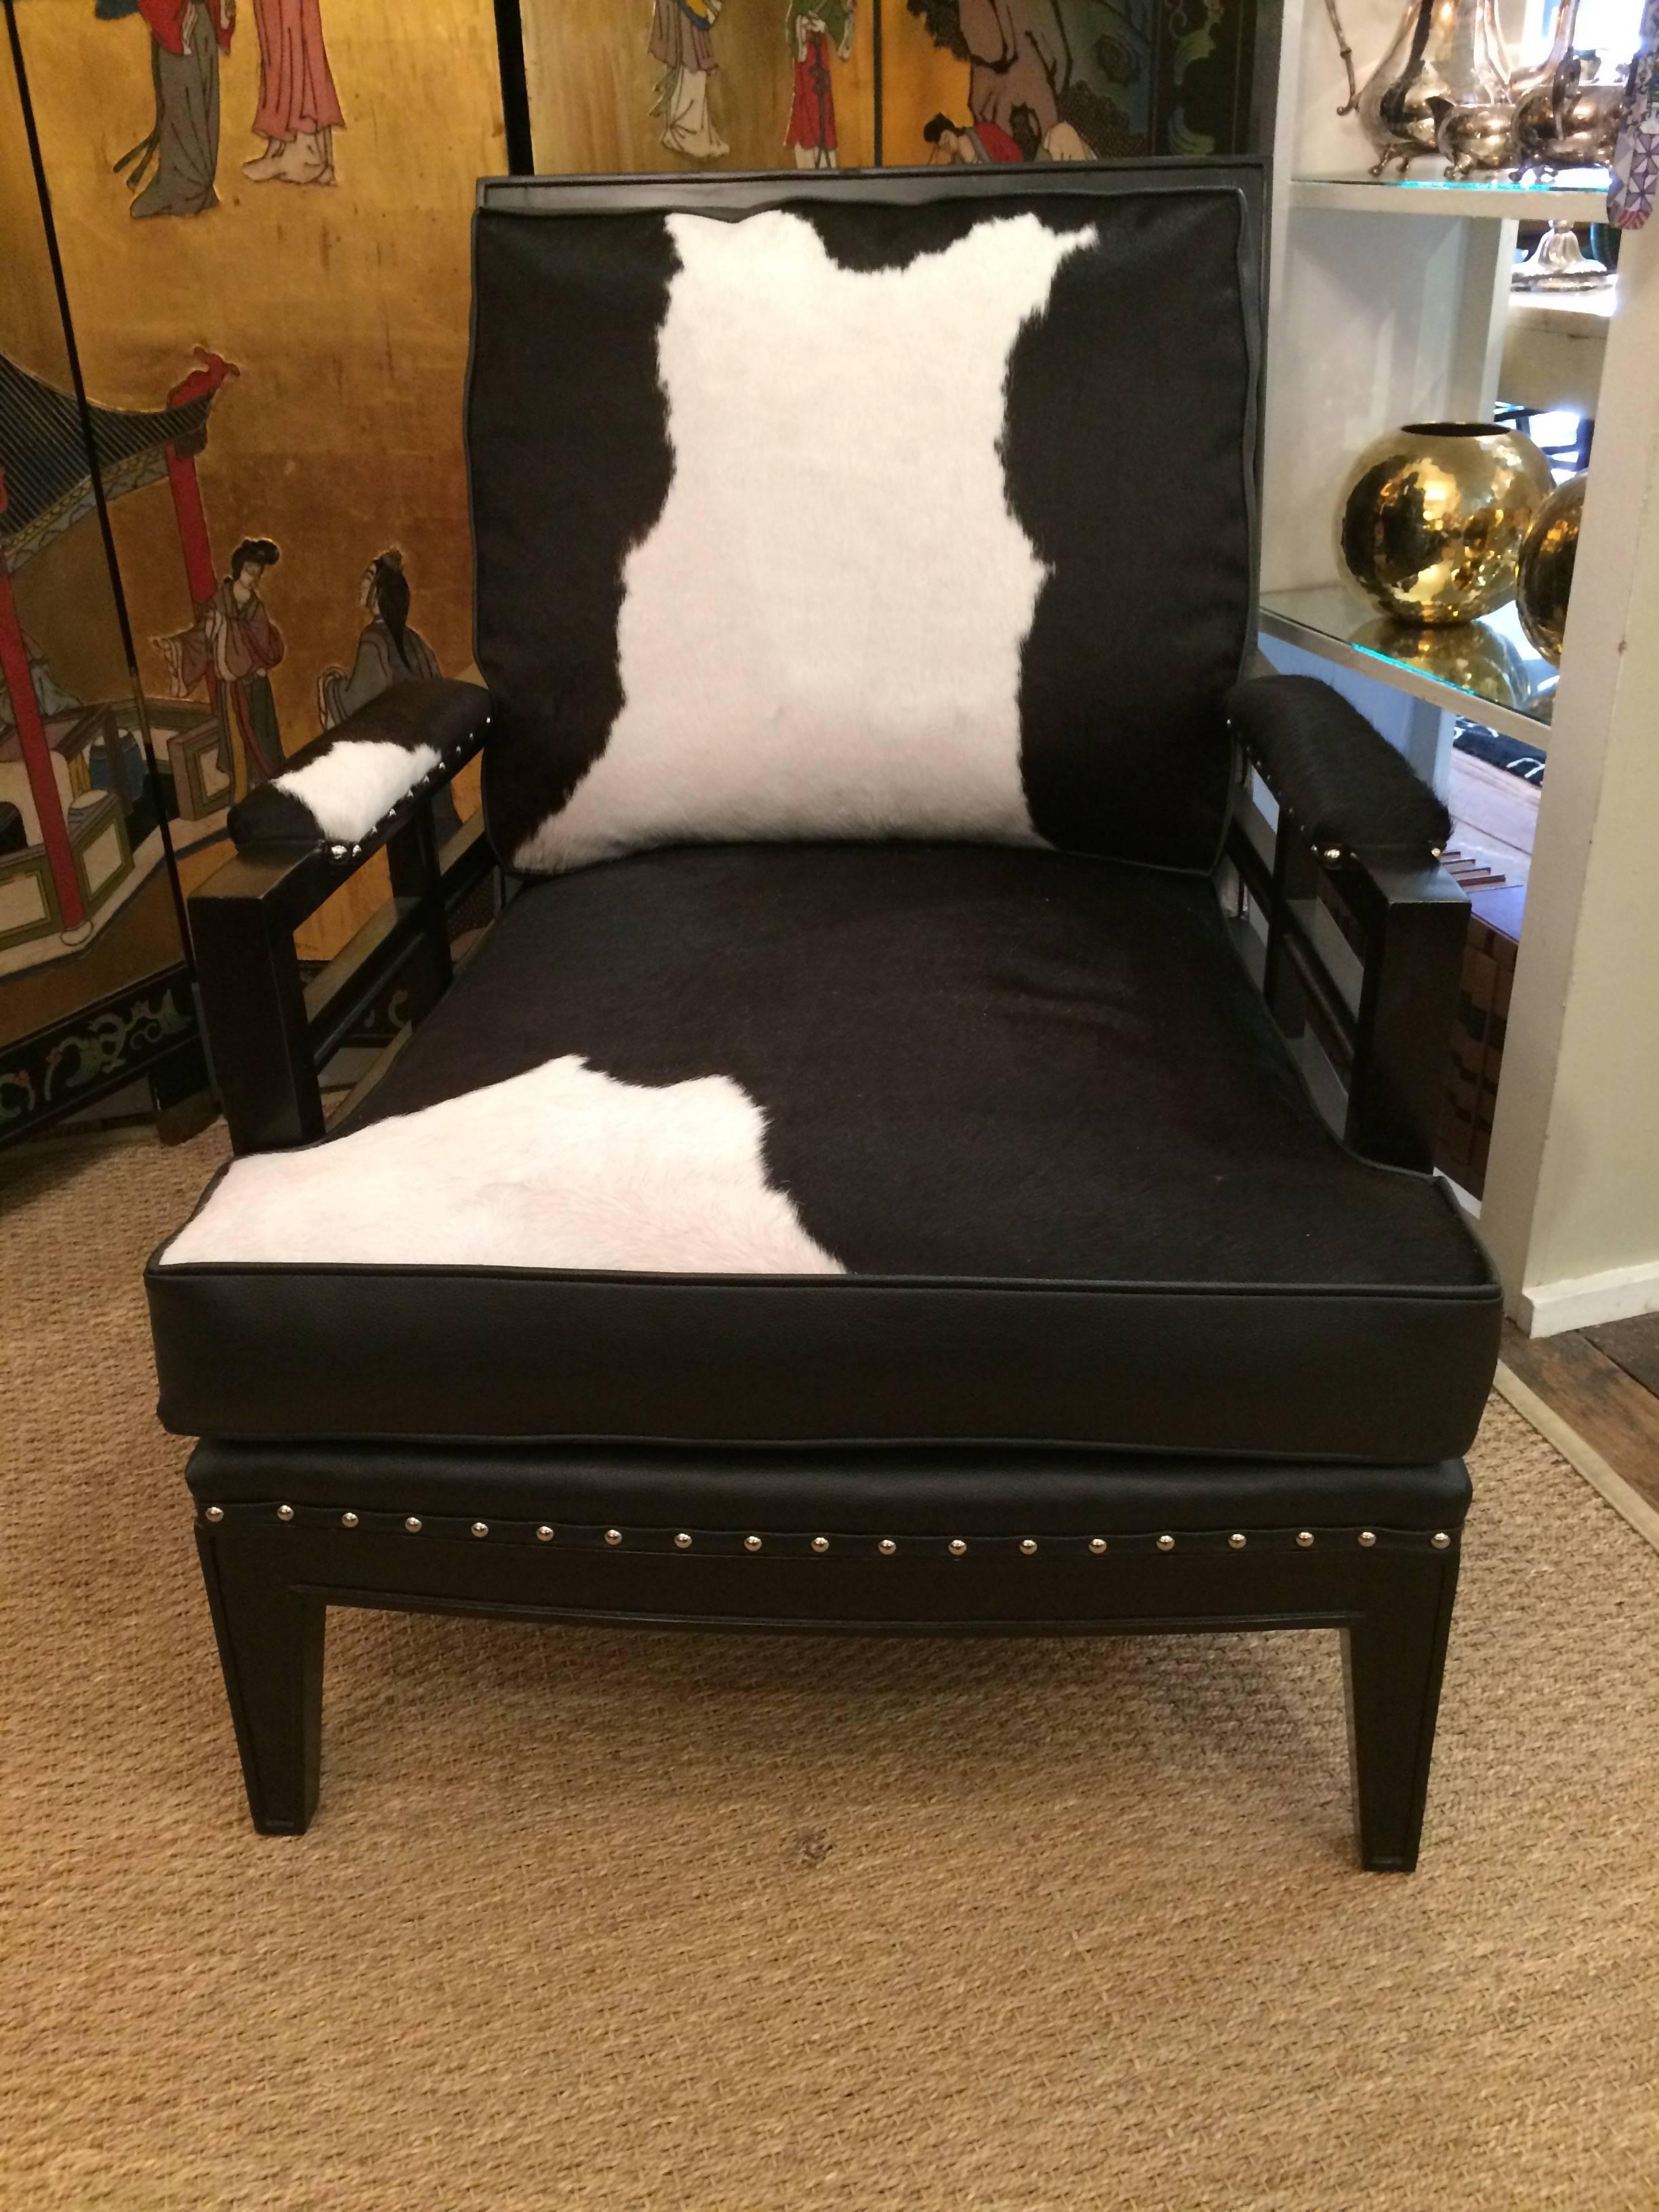 Stylish custom club chair and ottoman having ebonized wood and a mix of black leather and black and white cowhide upholstery, finished with nailheads. The ottoman has a stretcher style base and measures: 26 W x 19 D x 17 H.